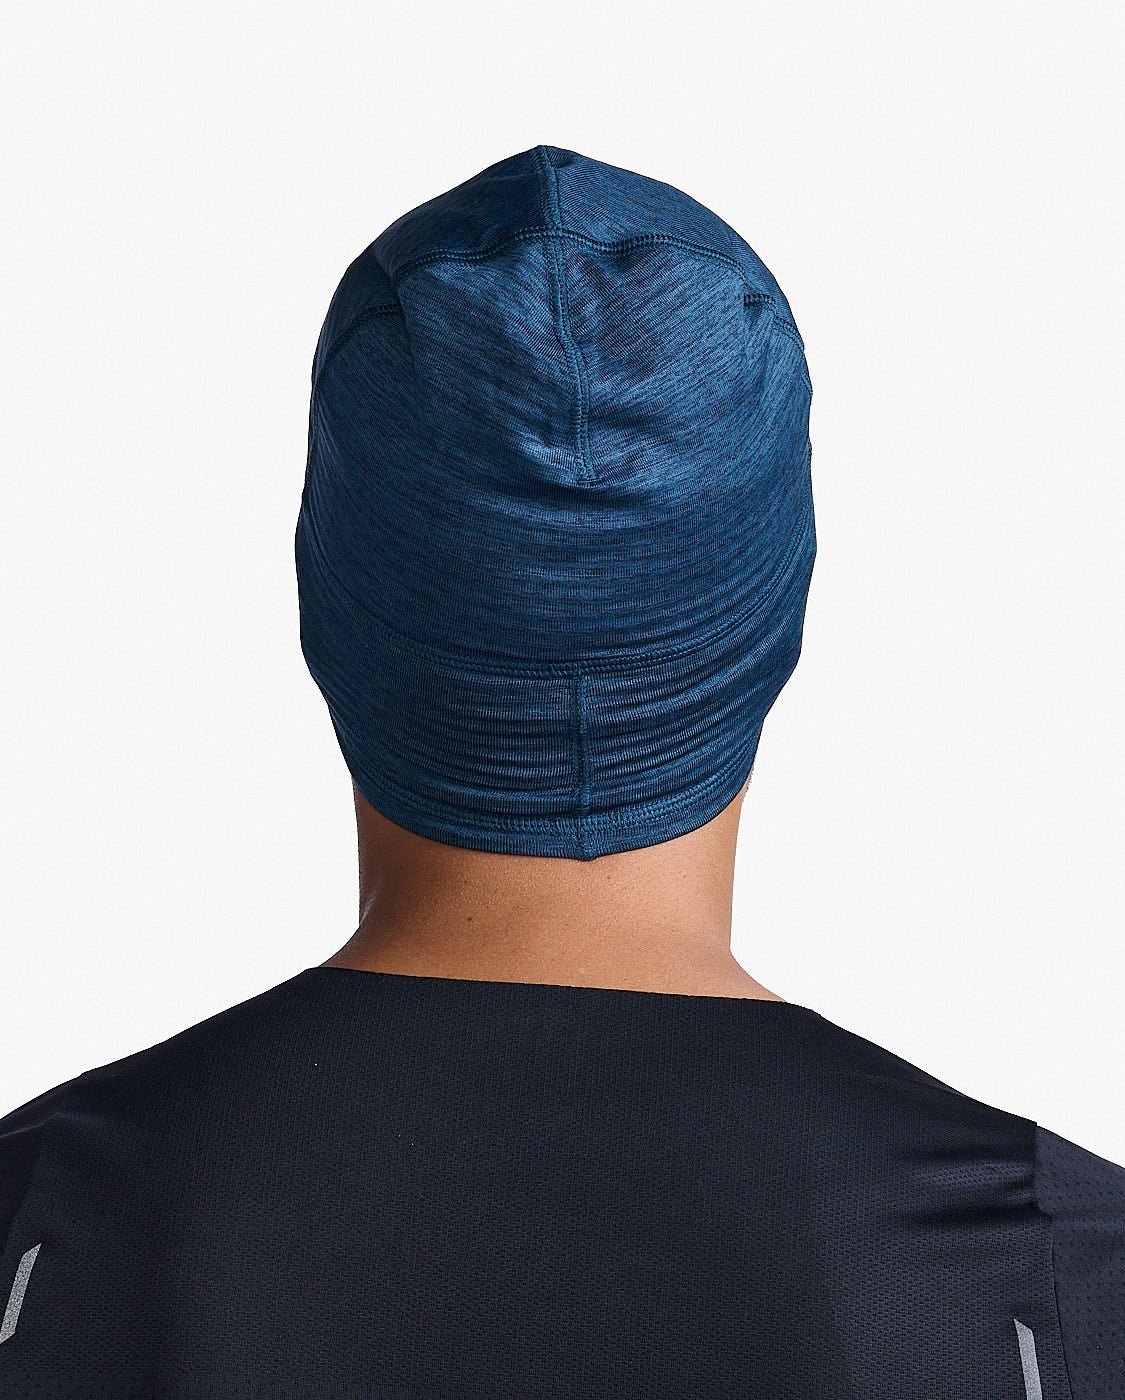 2XU South Africa - Ignition Beanie - Moonlight/Silver Reflective